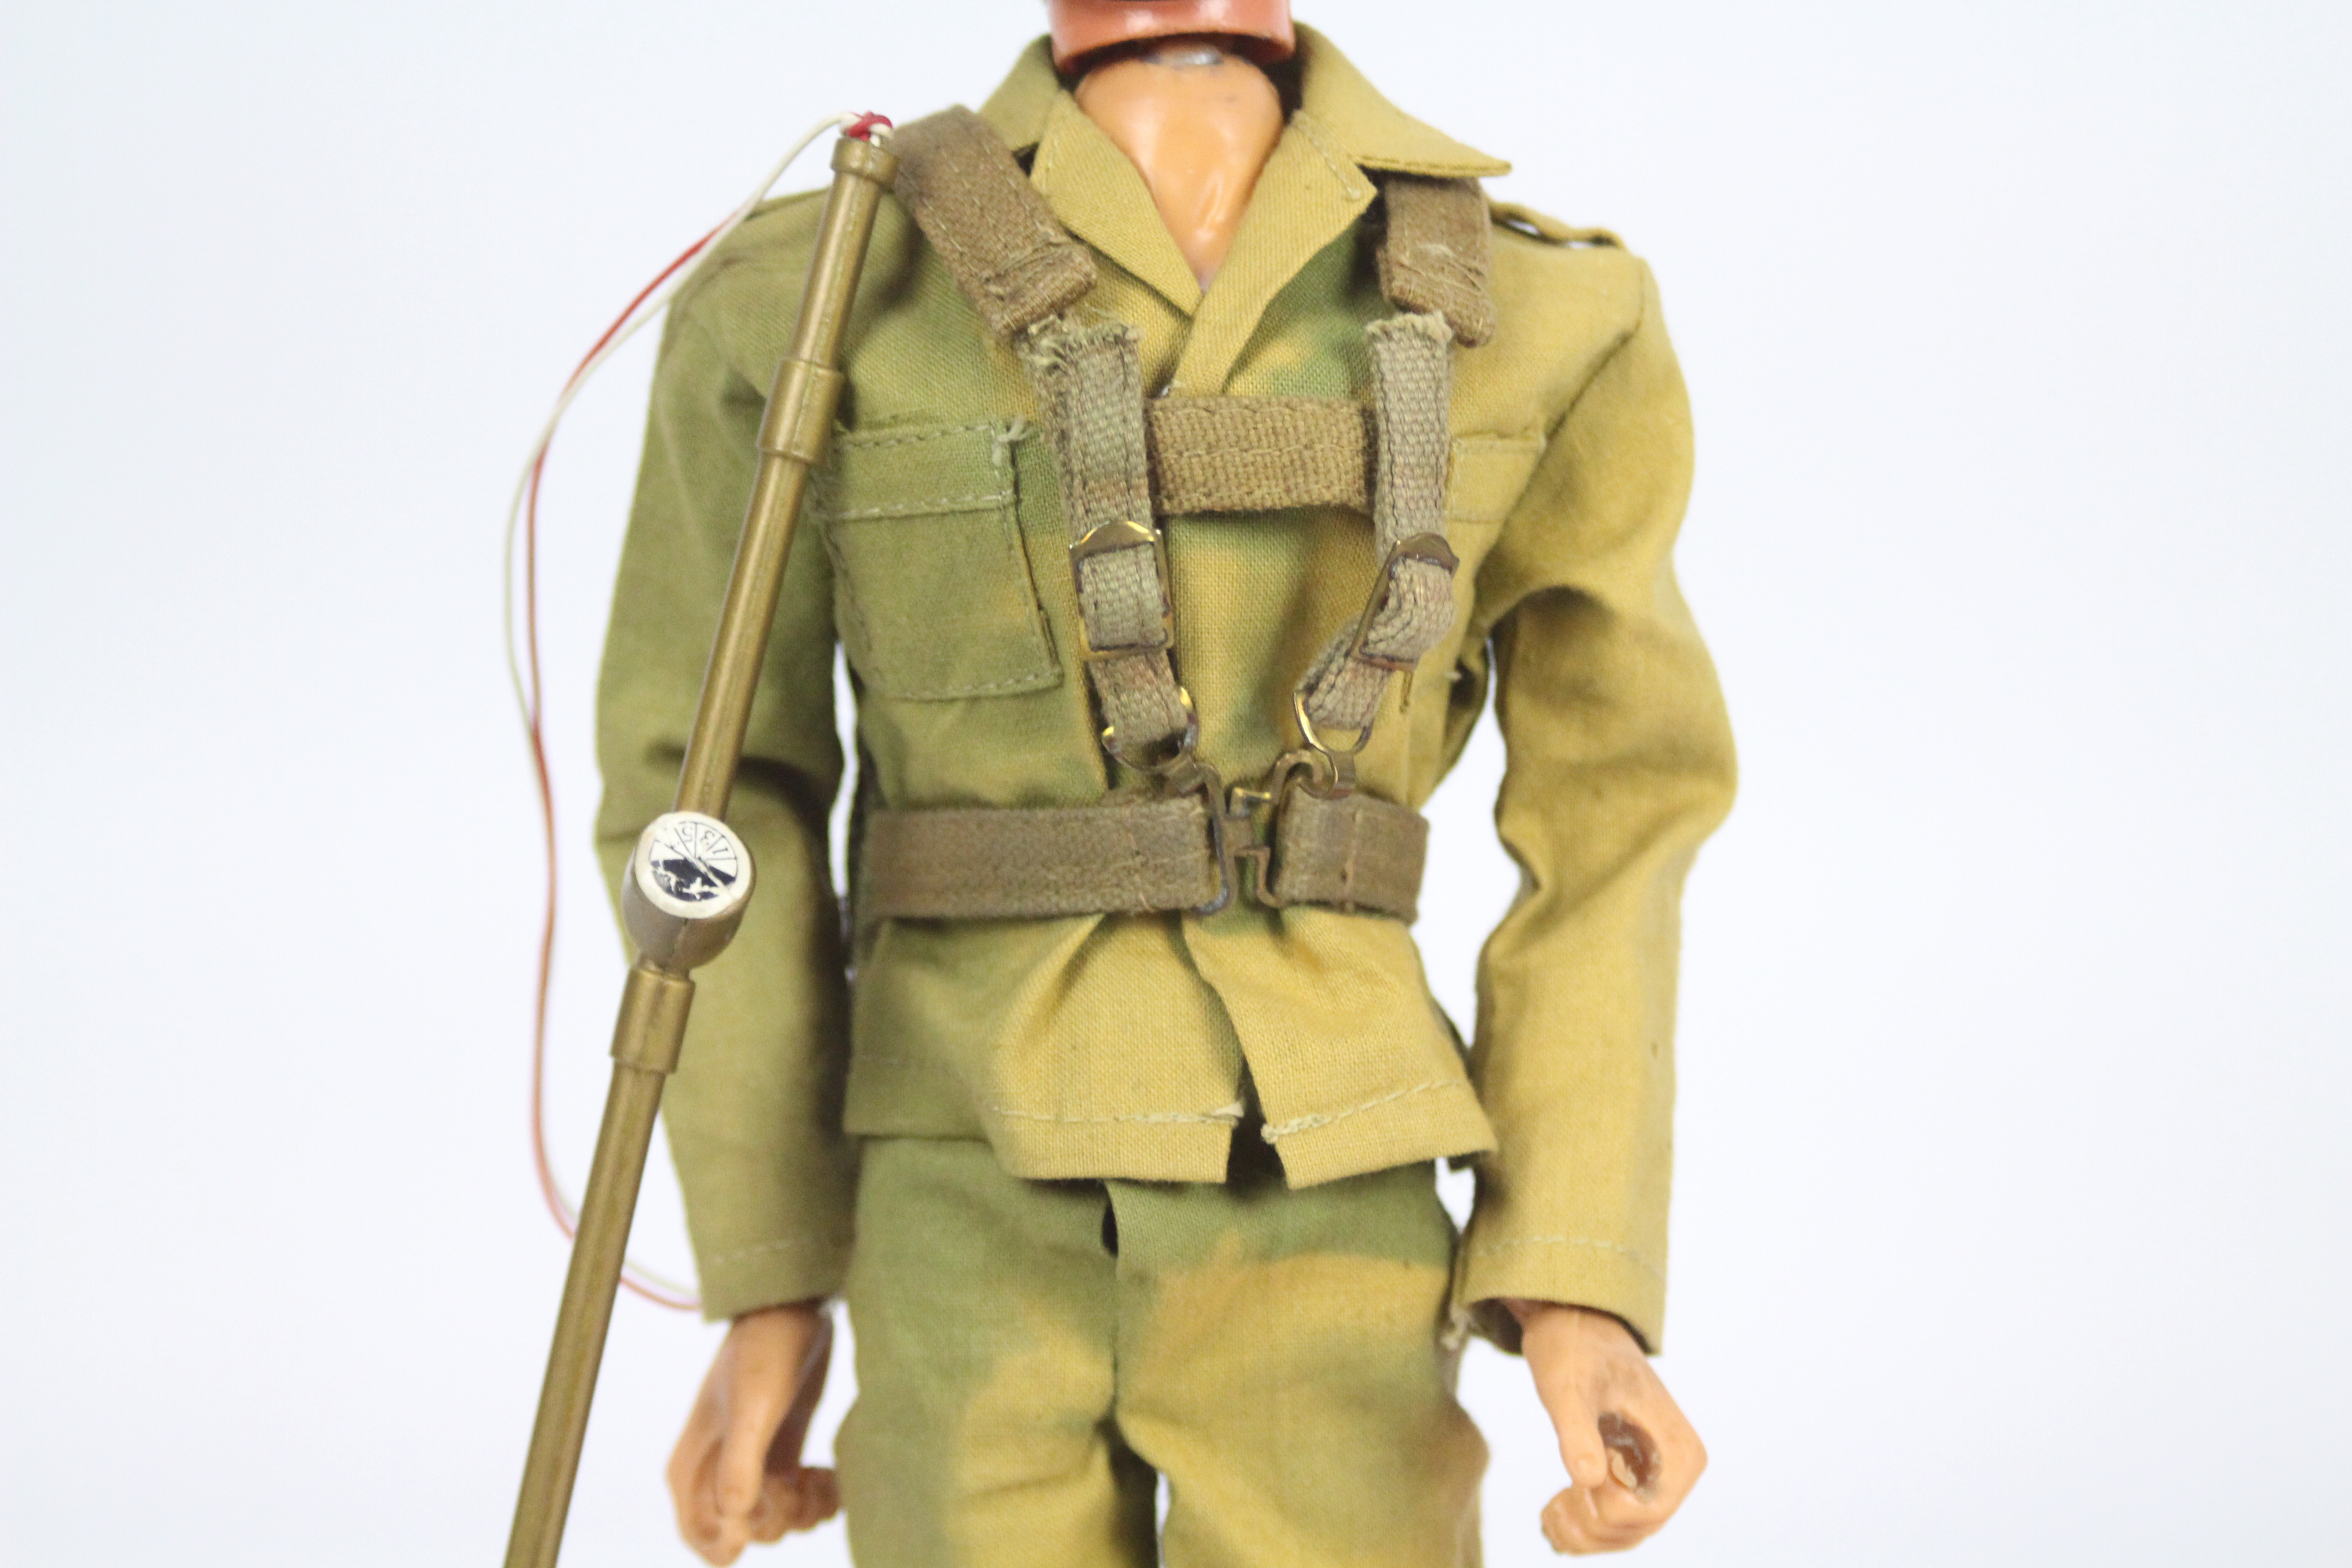 Palitoy, Action Man - A Palitoy Action Man figure in Mine Detection outfit . - Image 3 of 7